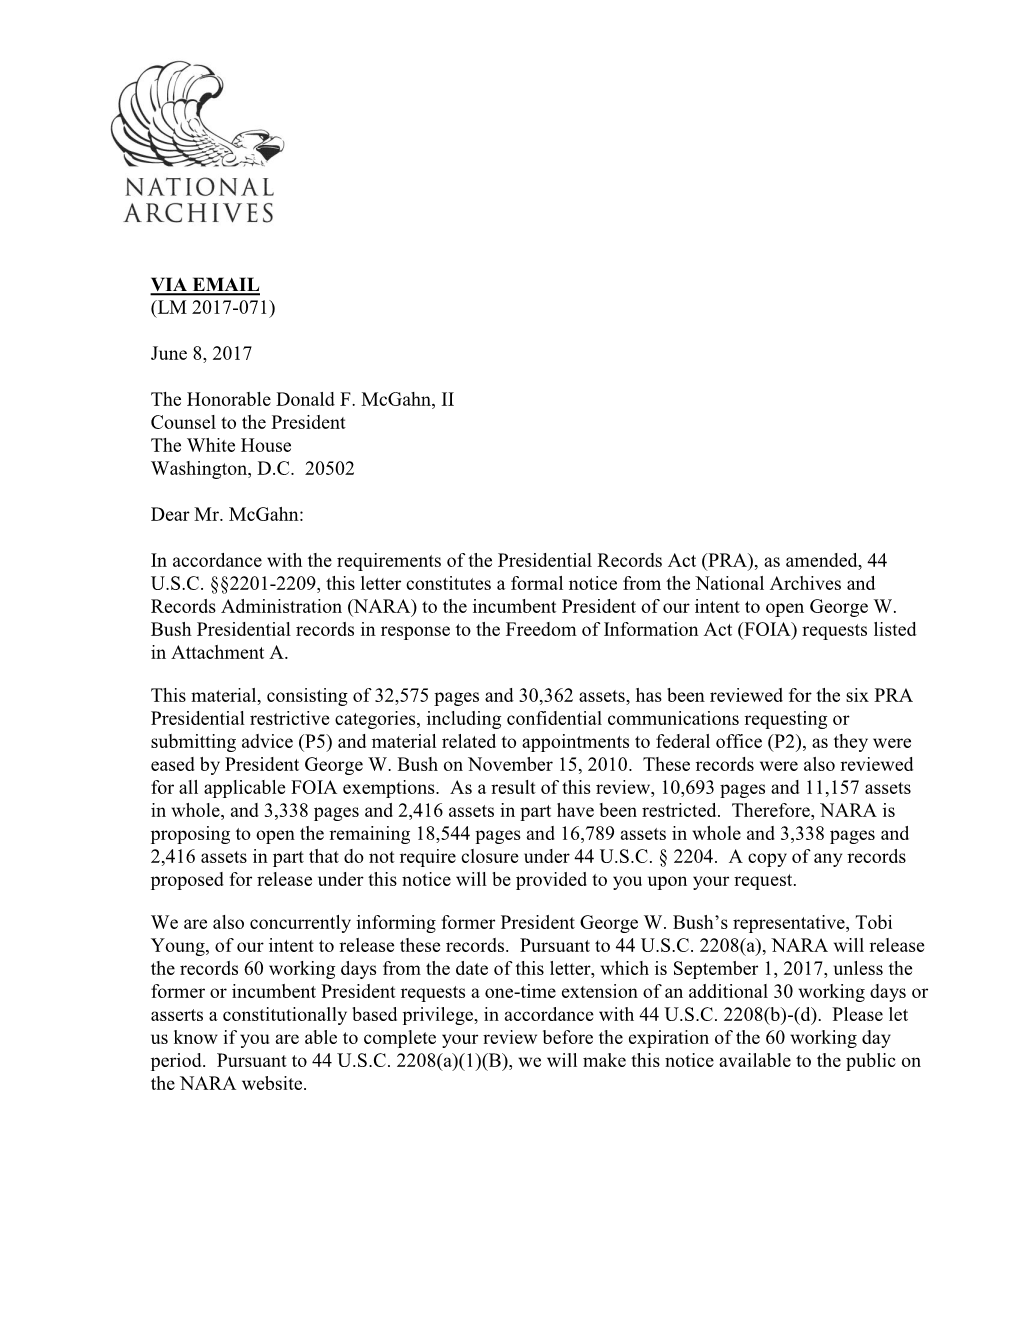 Letter of Notification of Presidential Records Release (George W. Bush)